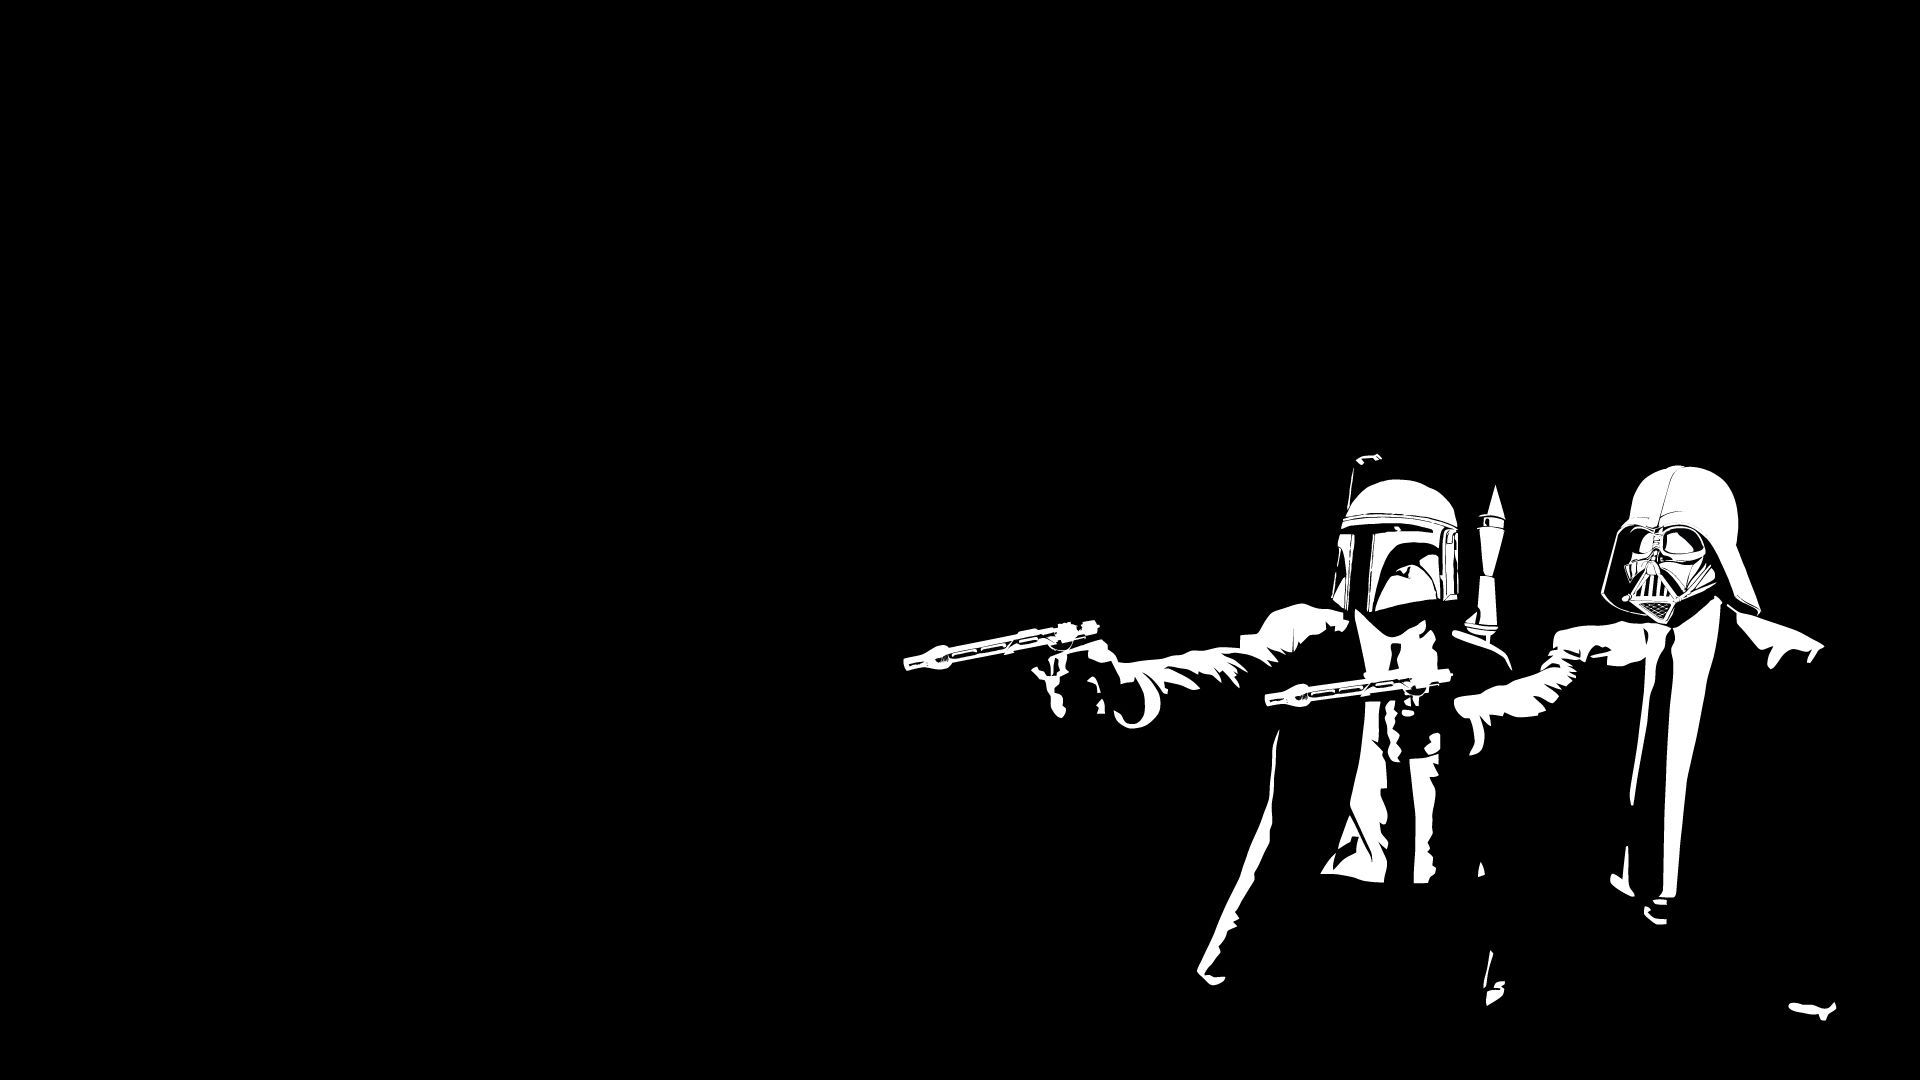 Star Wars Black and White Wallpapers on WallpaperDog